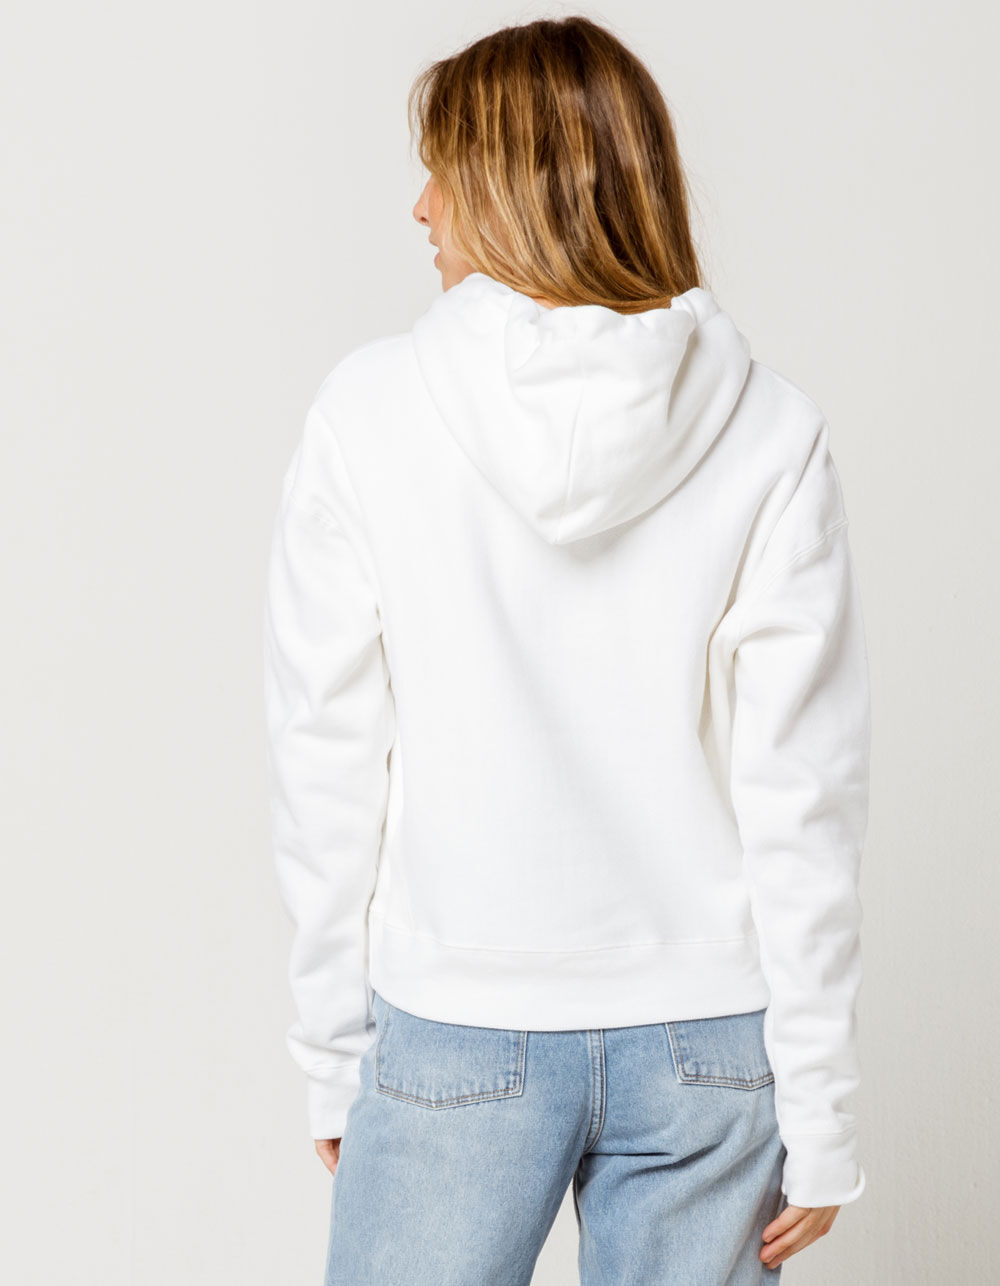 CHAMPION Reverse Weave Womens Hoodie - WHITE | Tillys